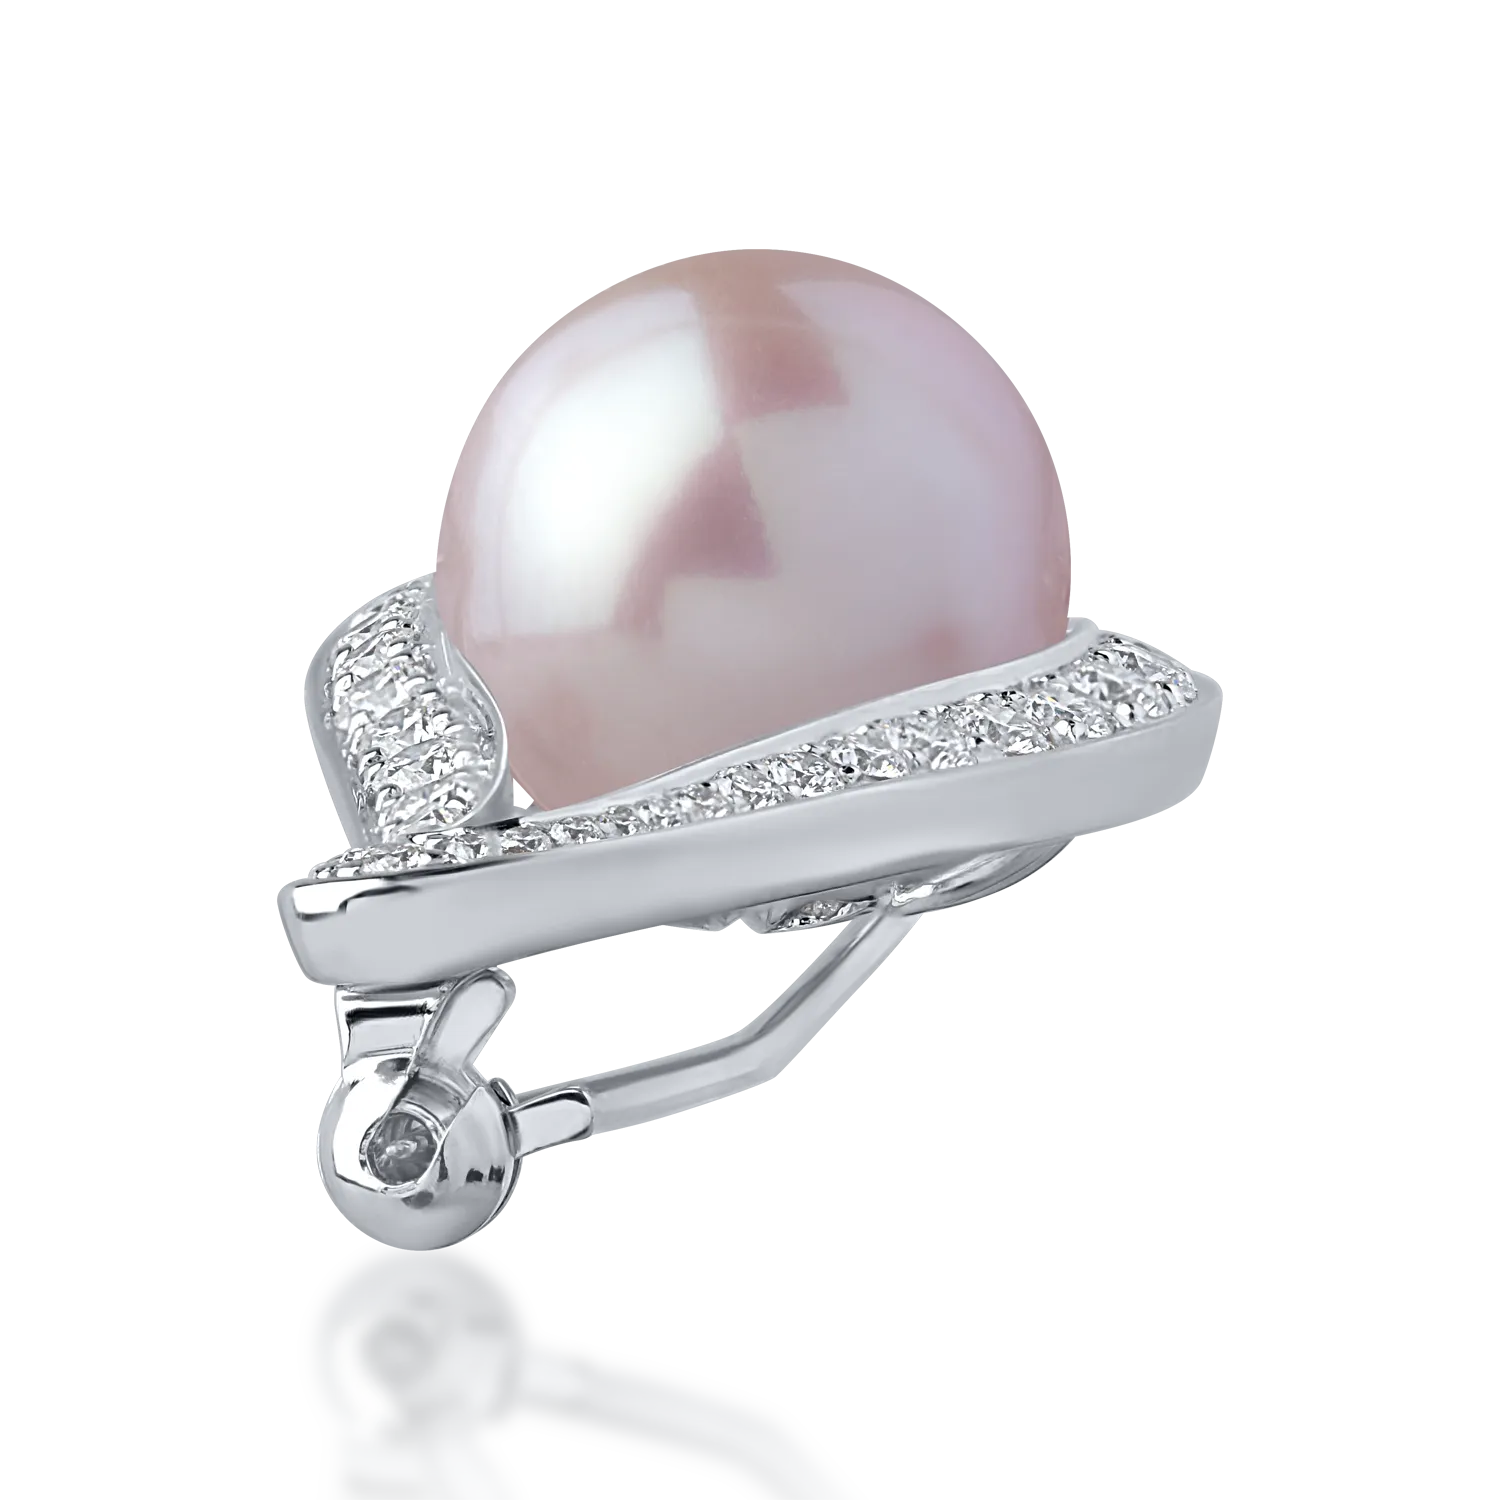 White gold brooch with 1ct freshwater pearl and 0.68ct diamonds